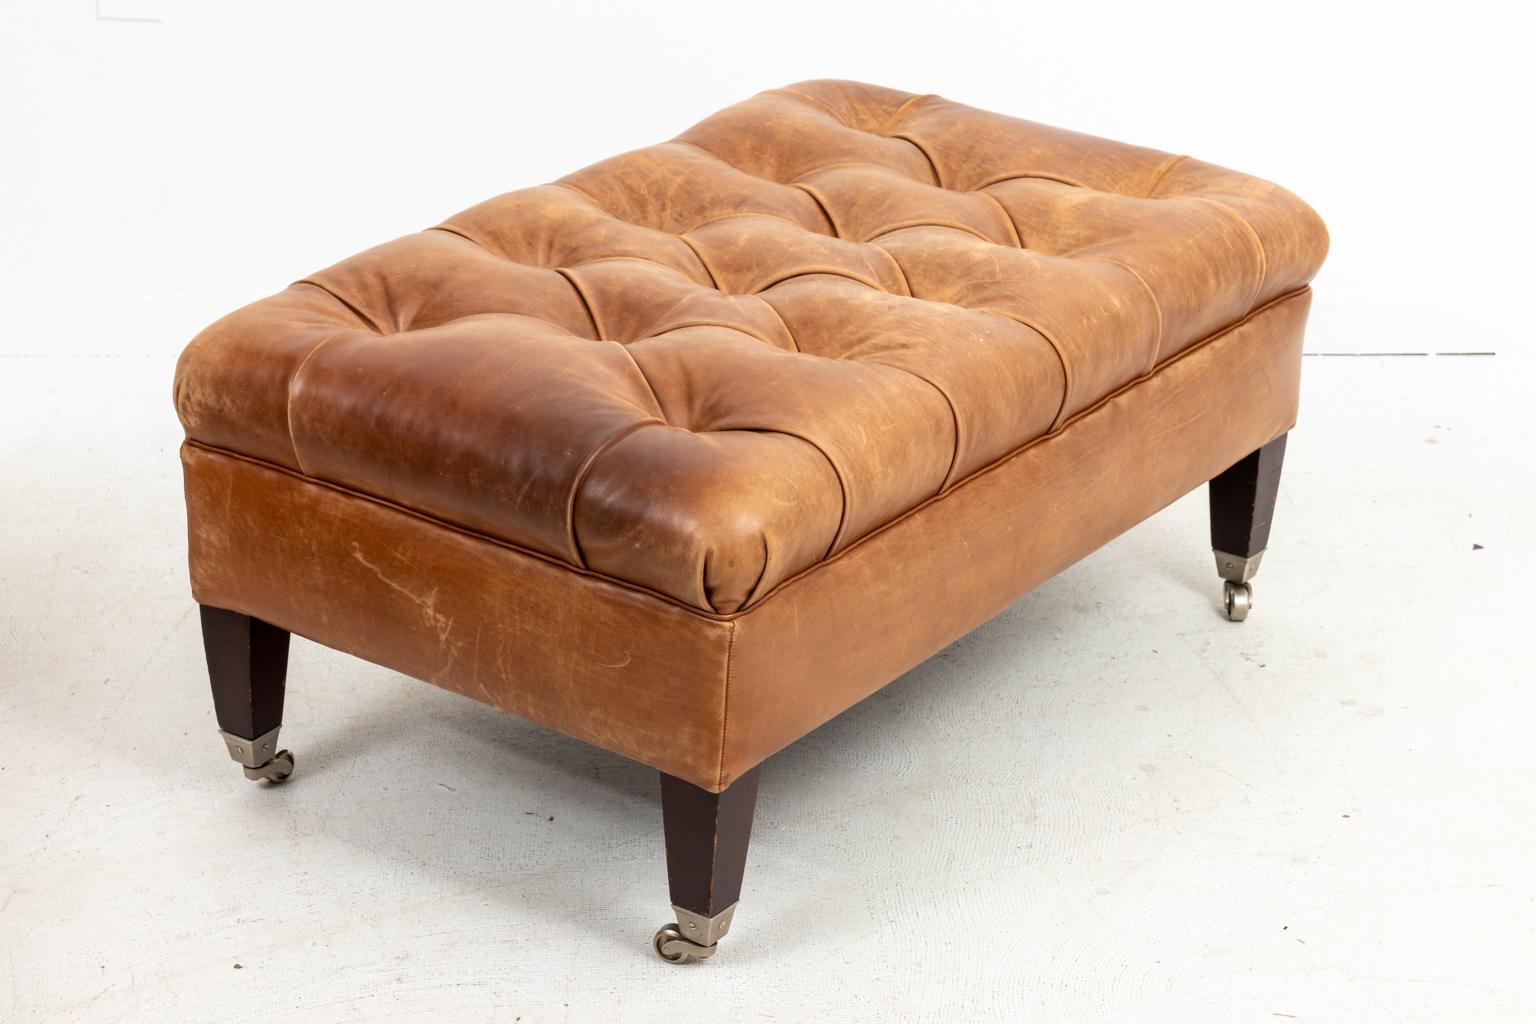 Pair of leather tufted benches with square tapered legs and chromed casters, circa 1960s. Please note of wear consistent with age.